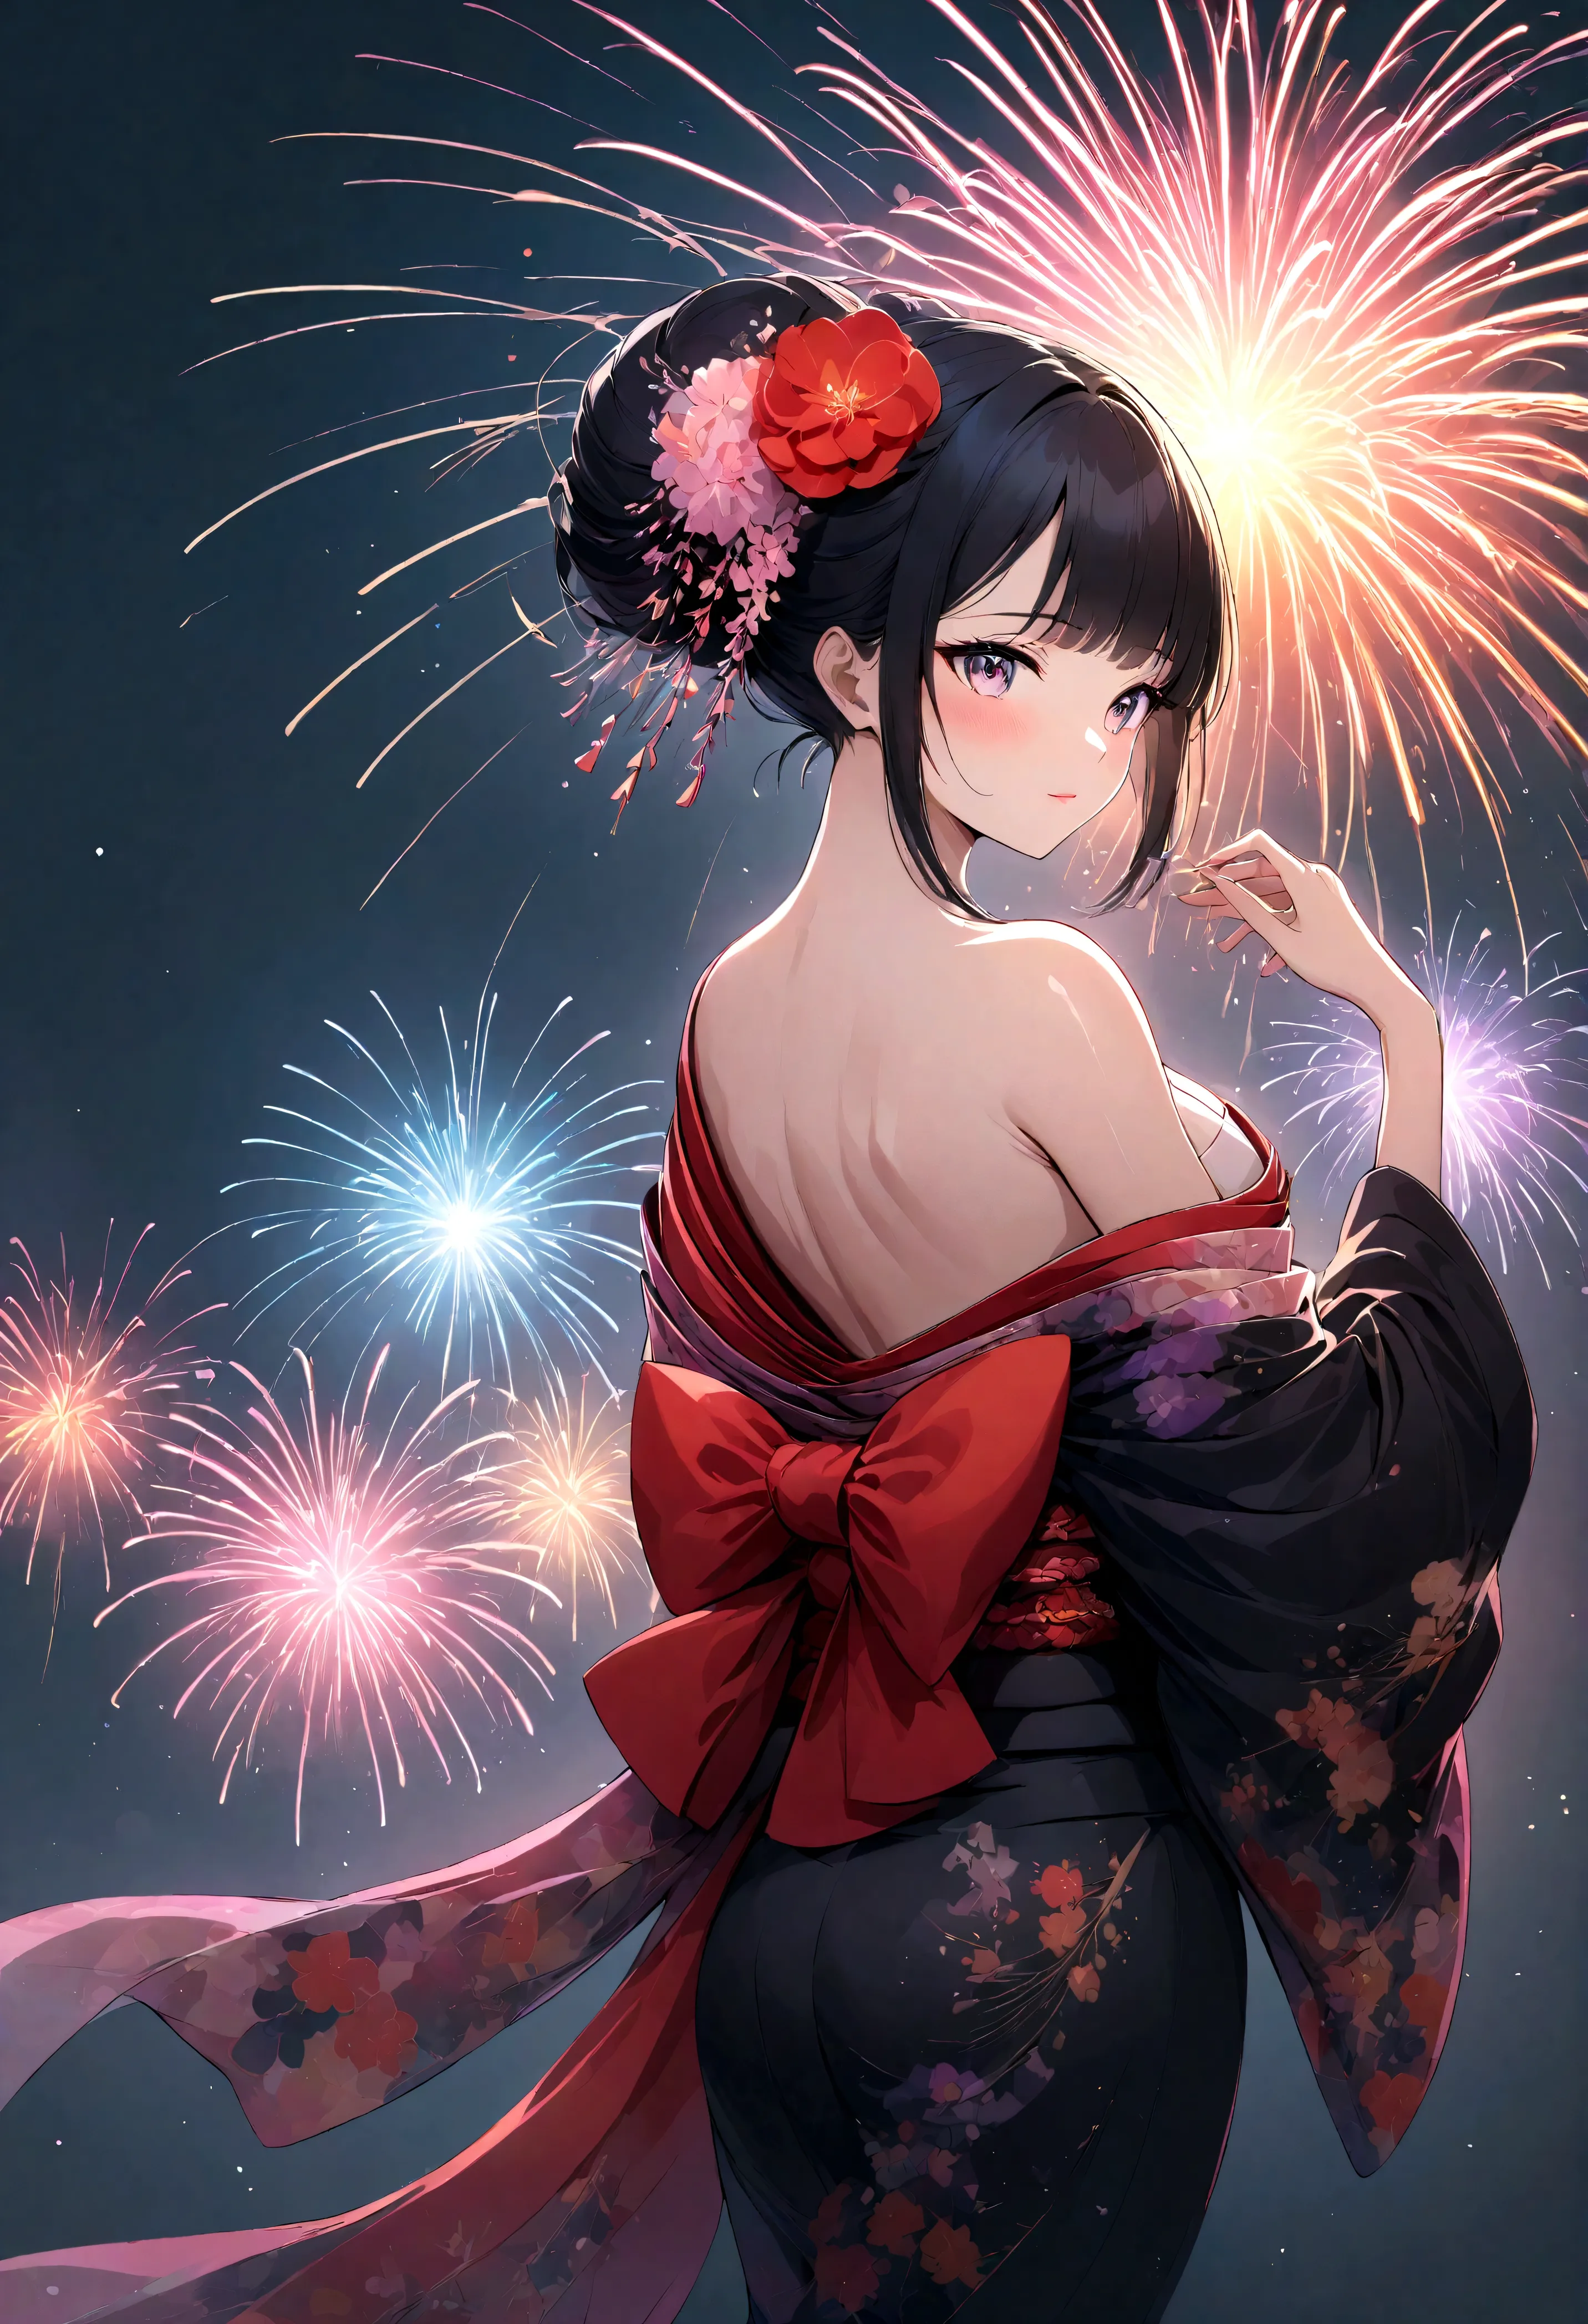 Anime Style, SW Maiko Girl, A woman wearing an elegant kimono, A spectacular fireworks display, Expressing the charming harmony ...